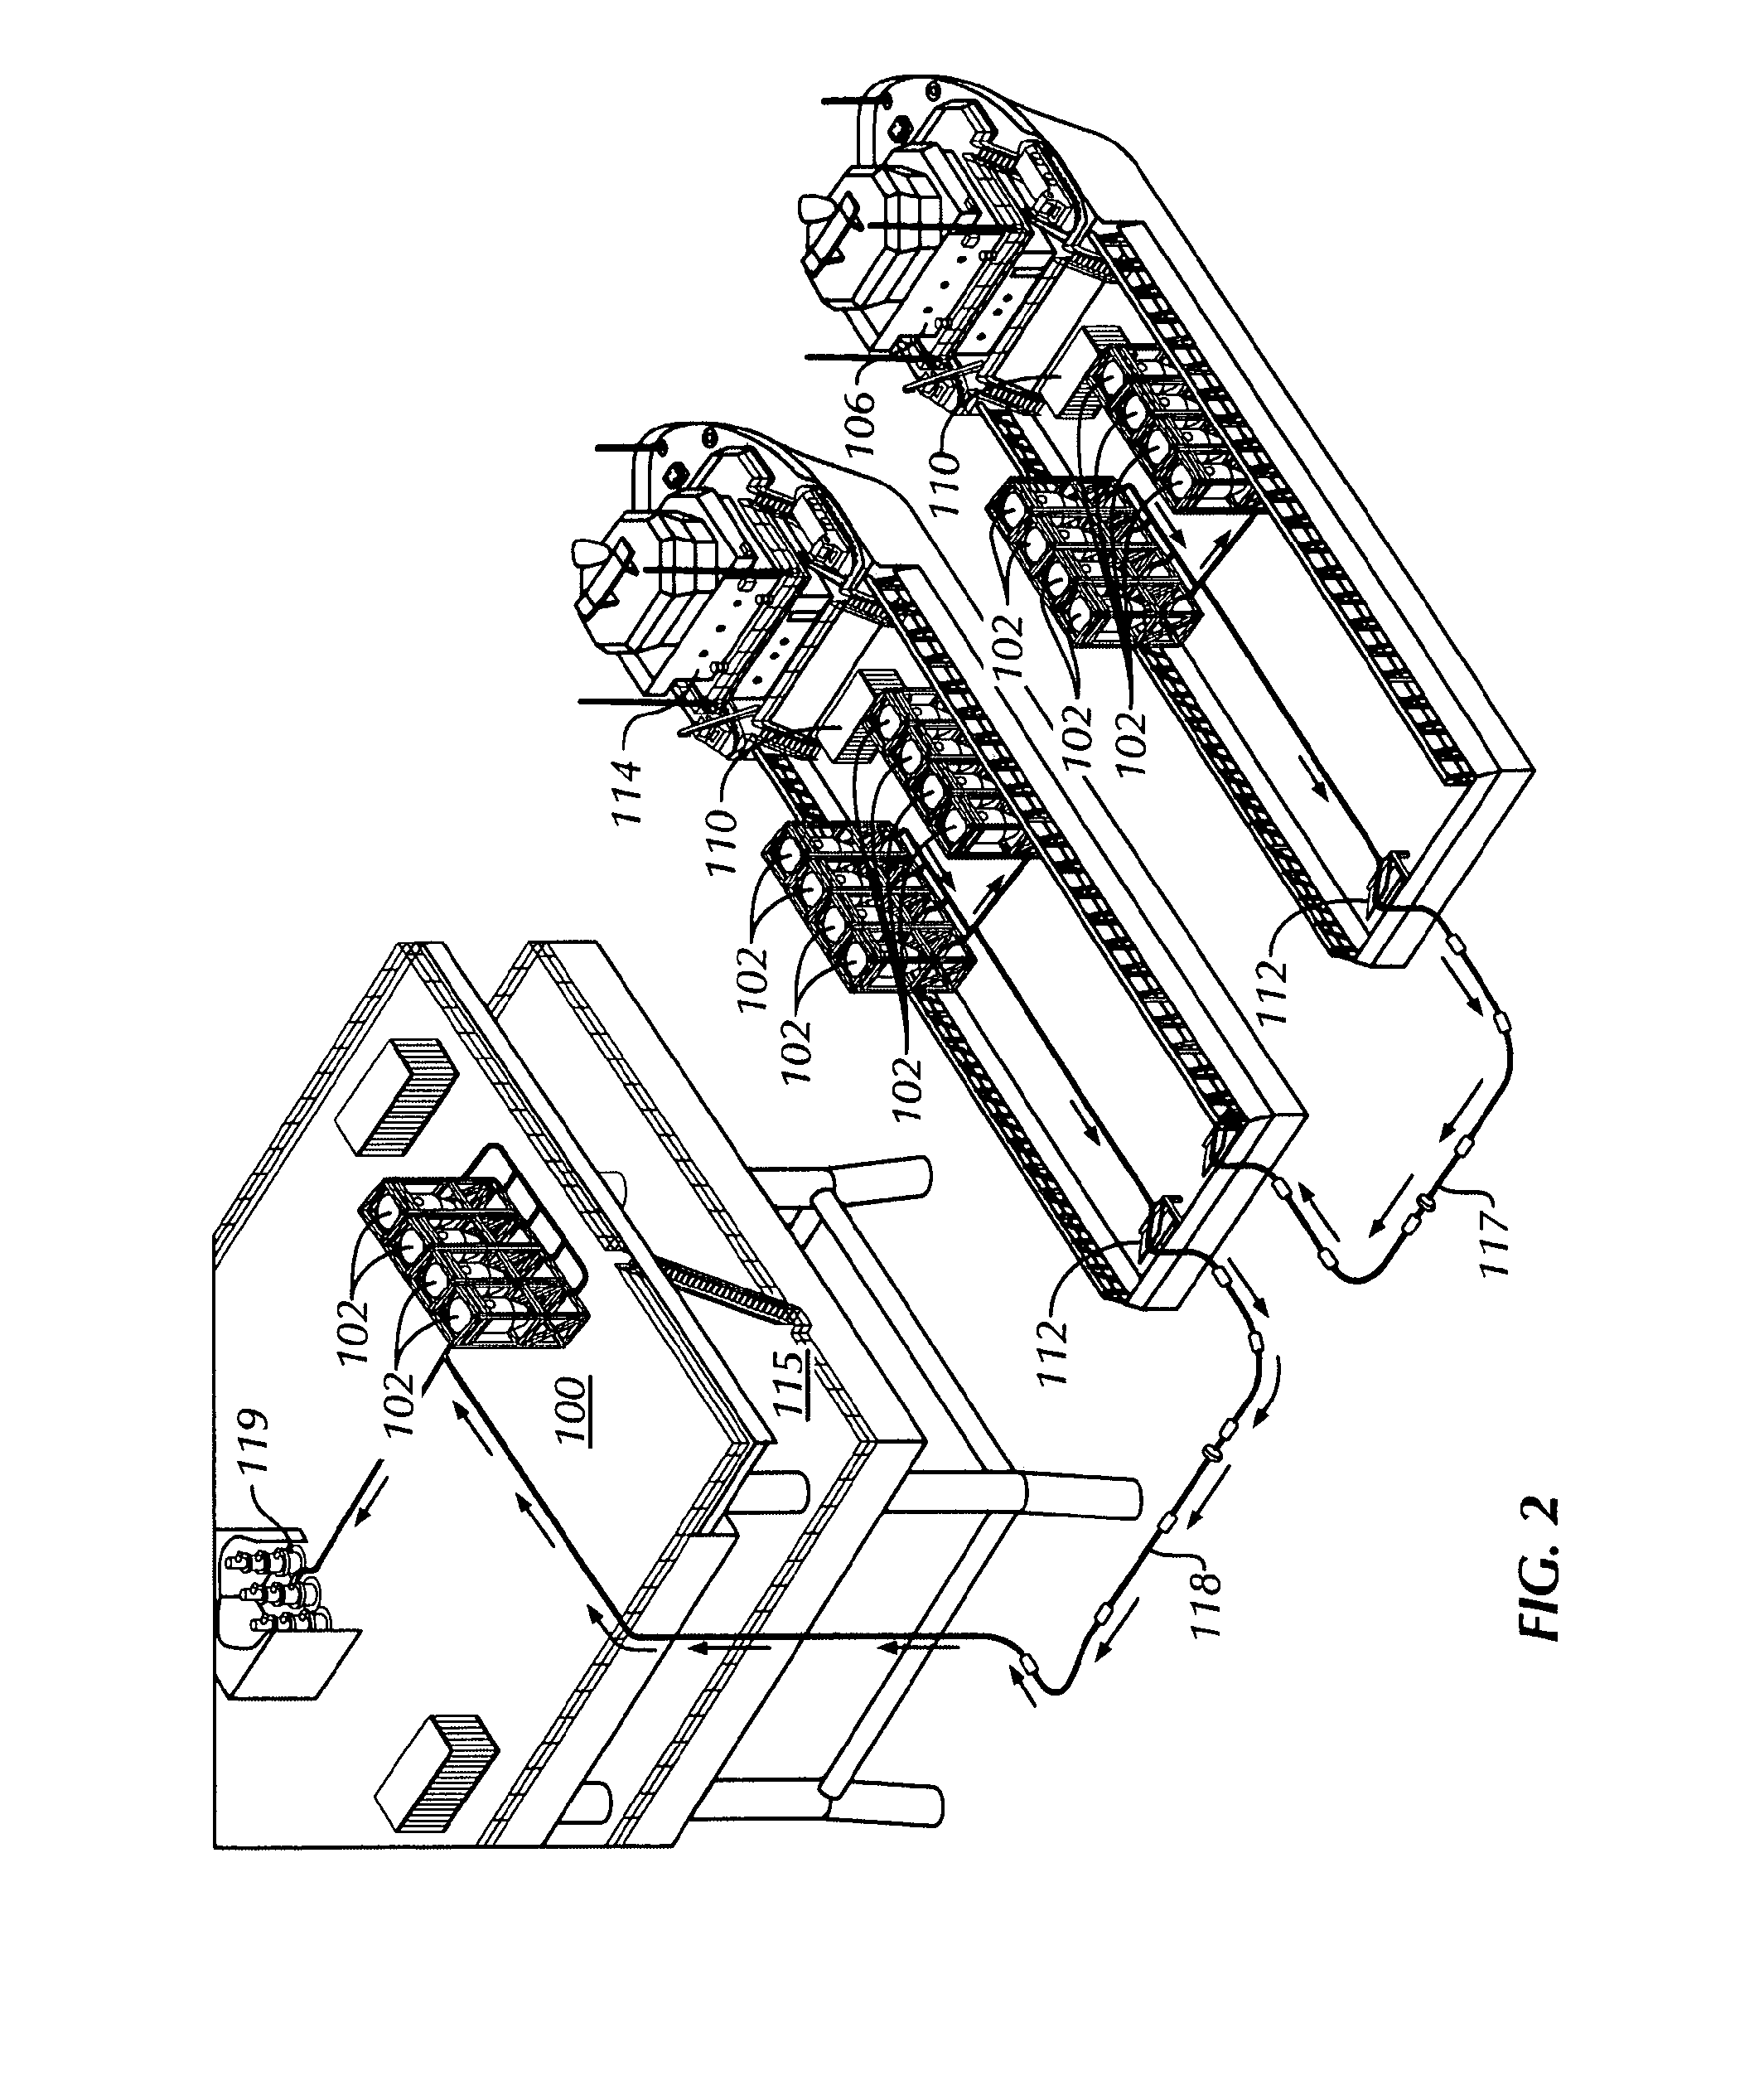 System and method for proppant transfer